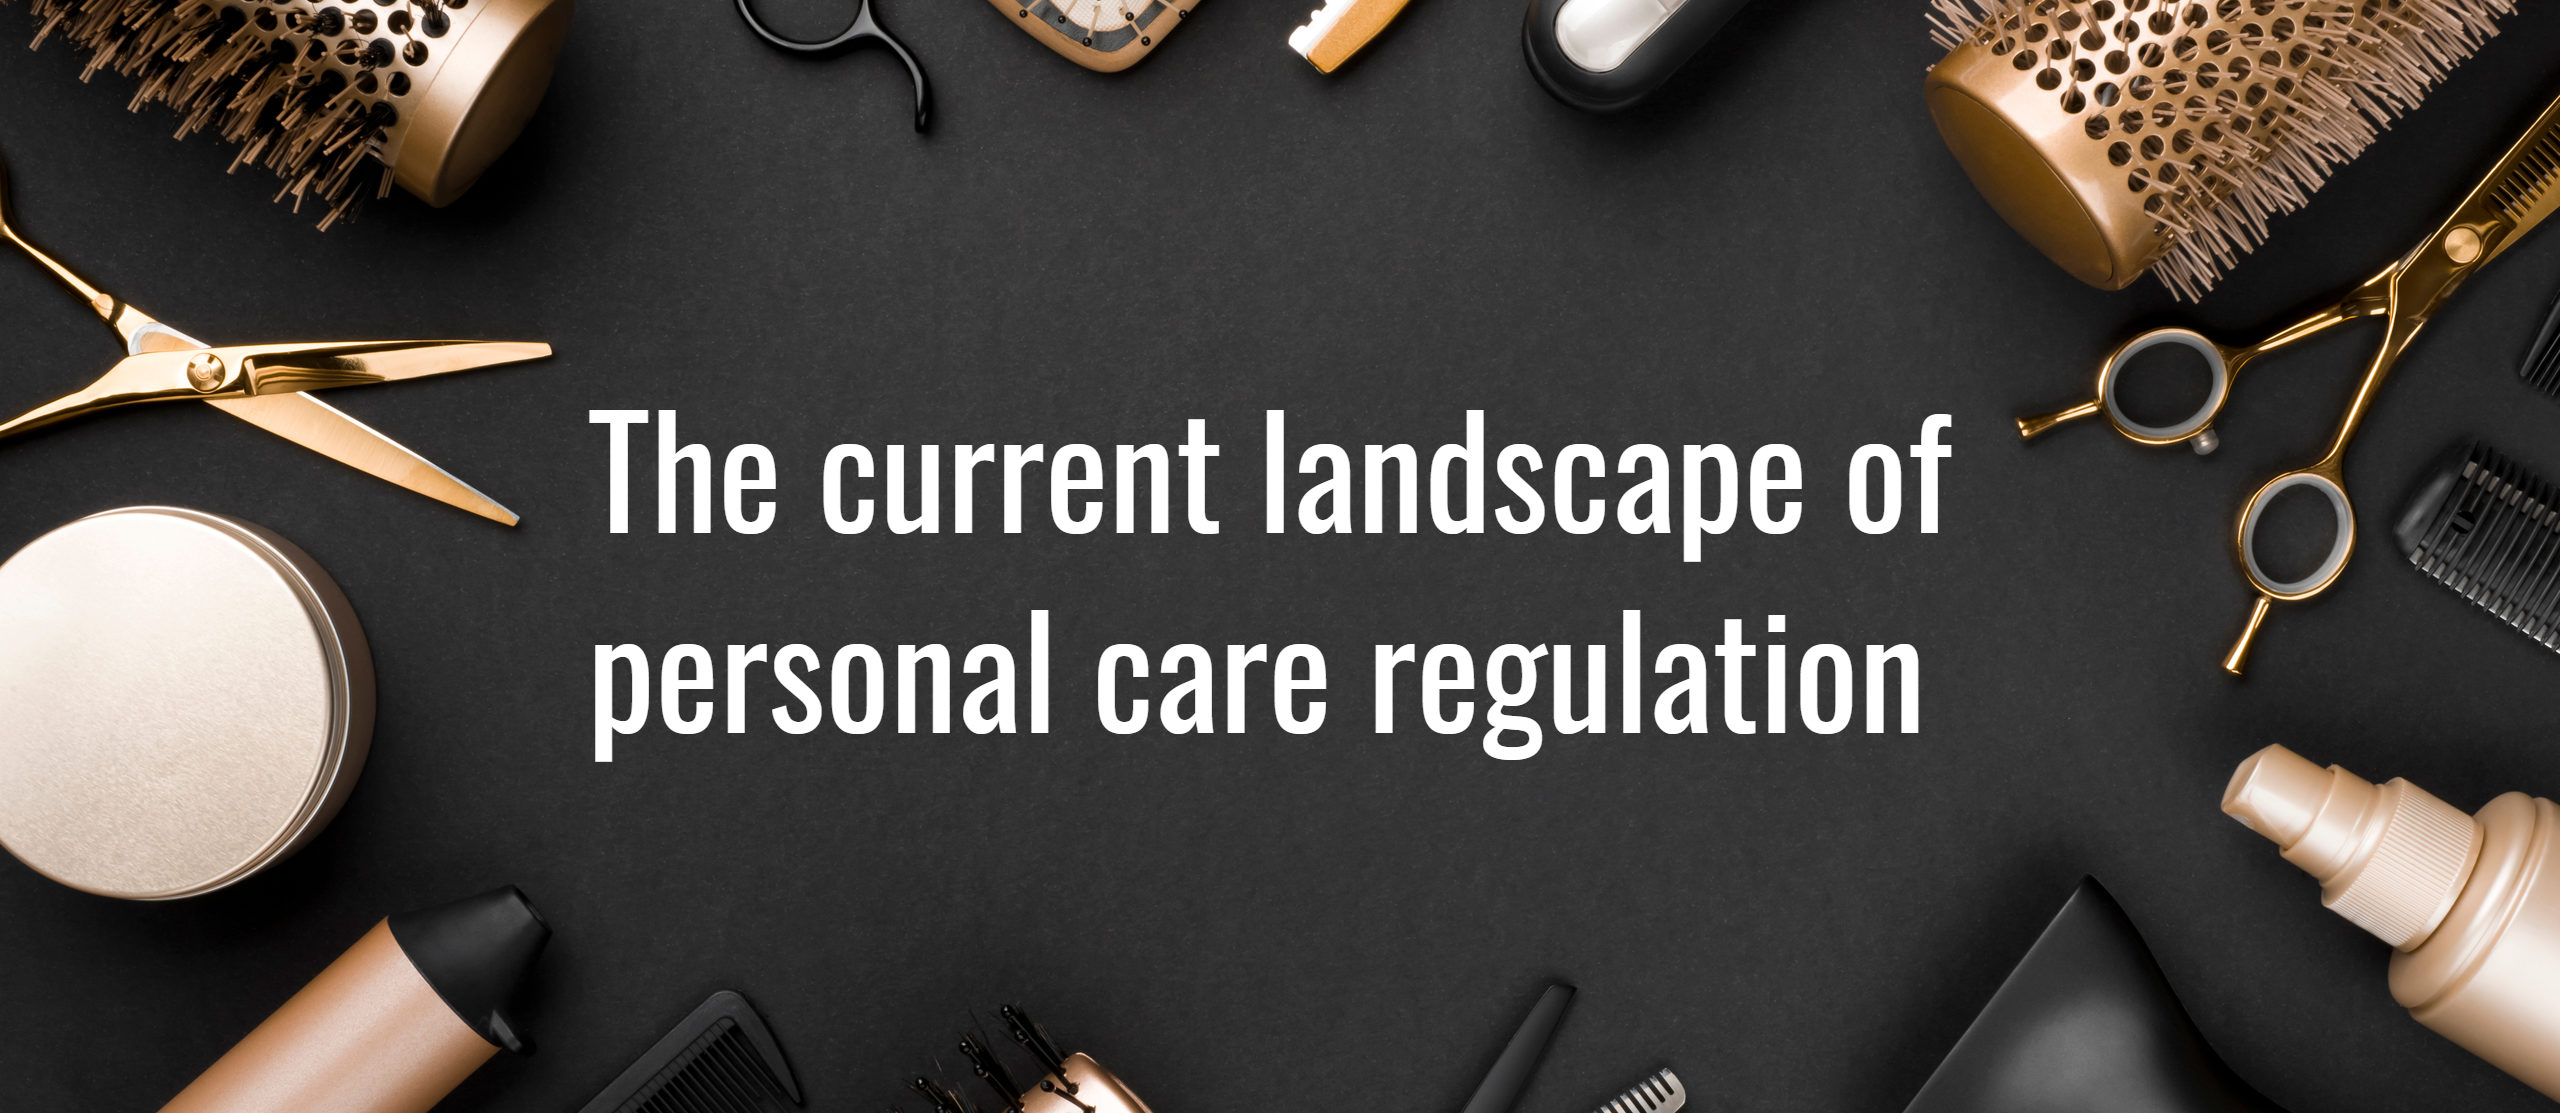 The current landscape of personal care regulation